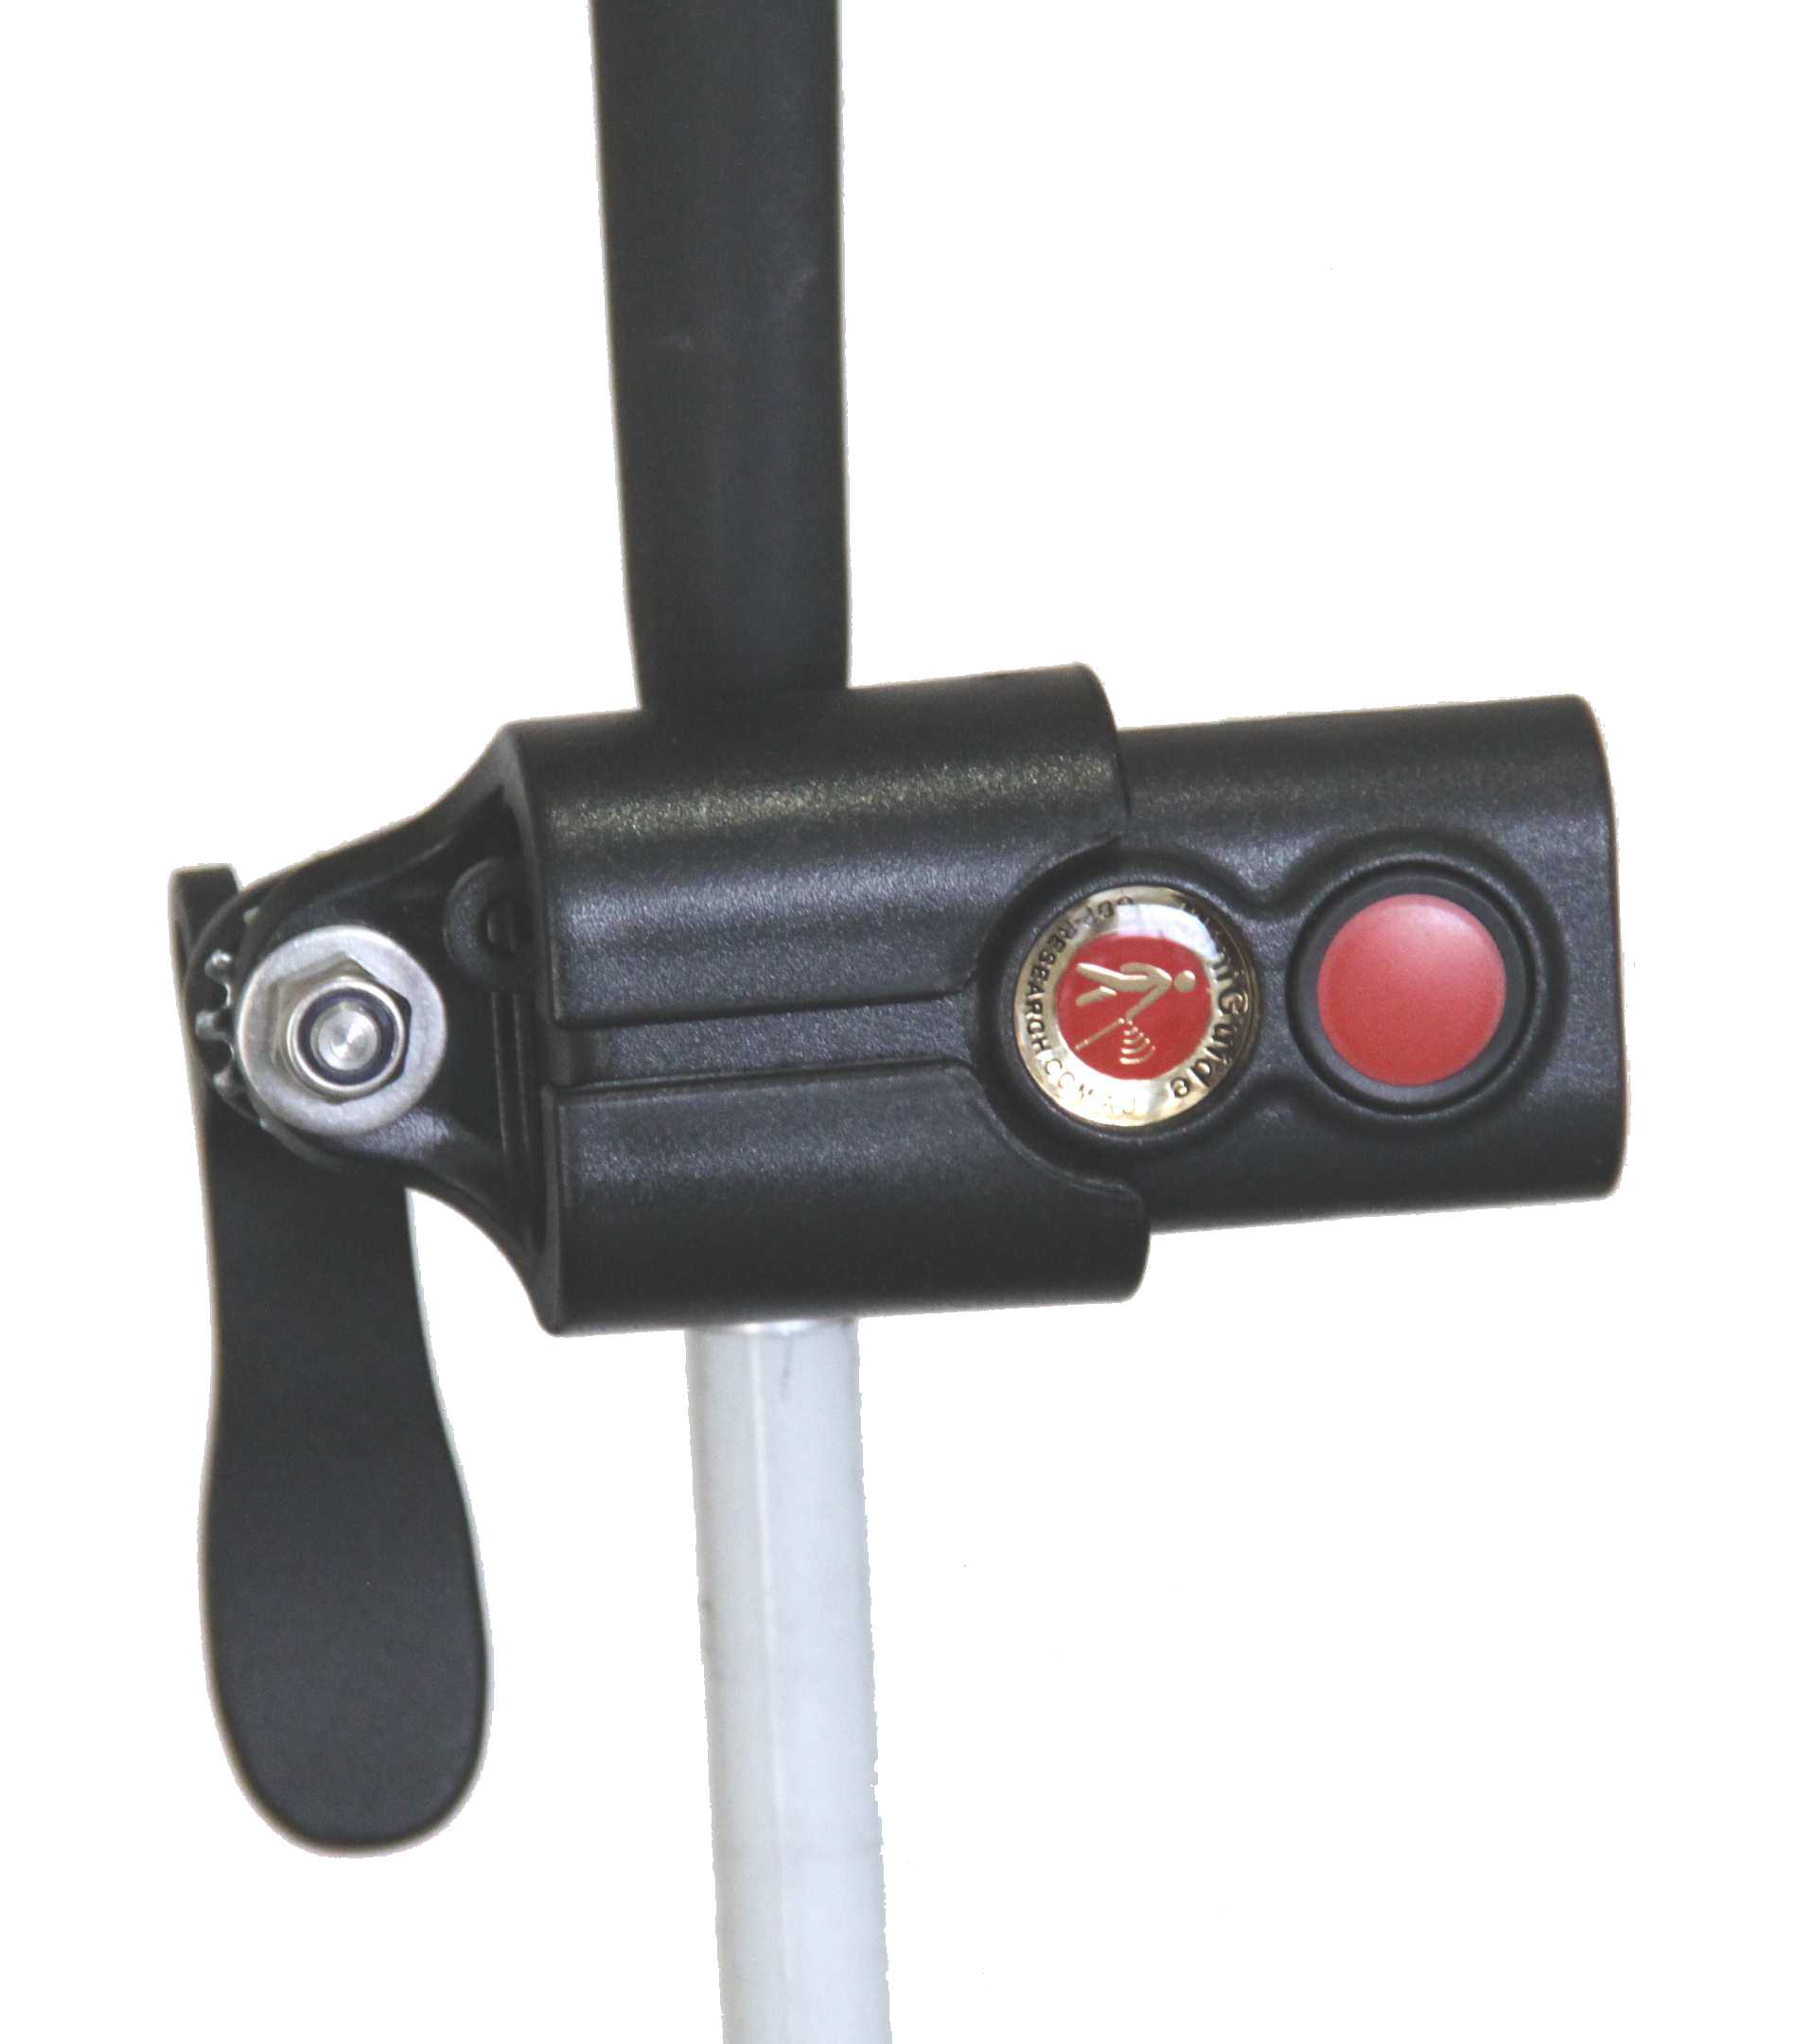 The Miniguide holder on a standard cane